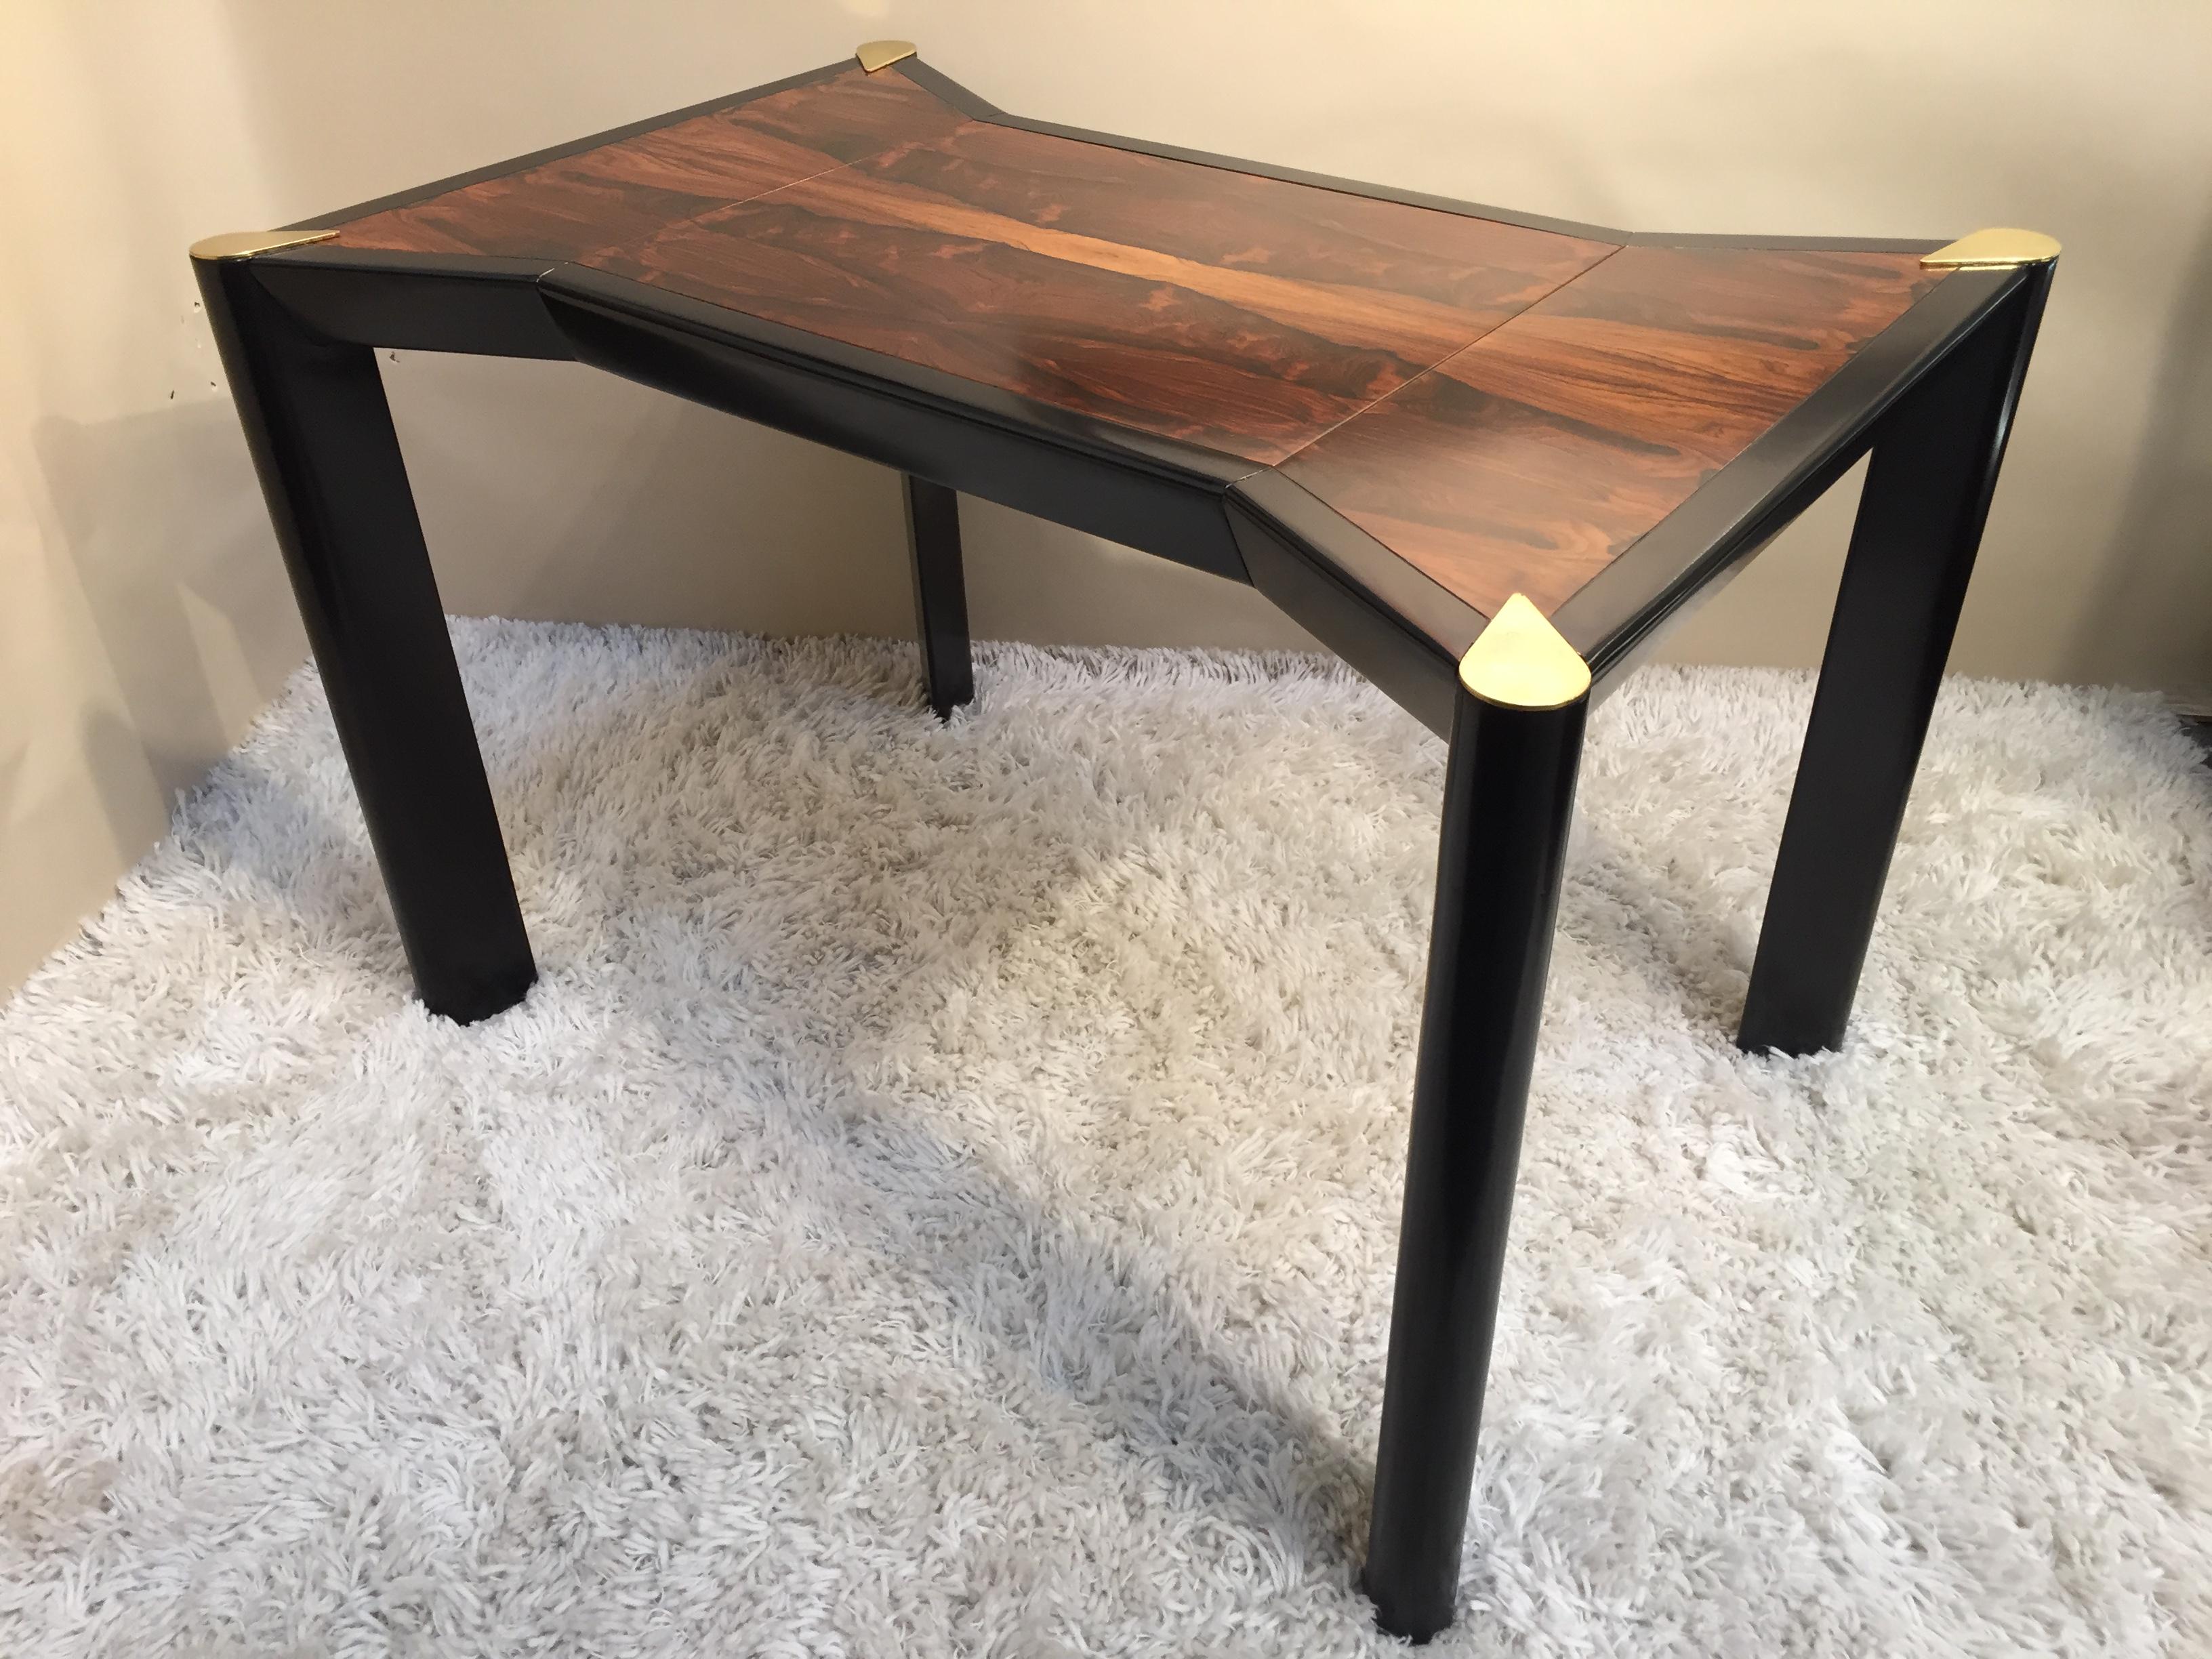 Quality rosewood top, dark walnut brass top leg game-table, reversible top for chess checkers, backgammon interior, another listing has two Harvey Probber chairs that work with this table.